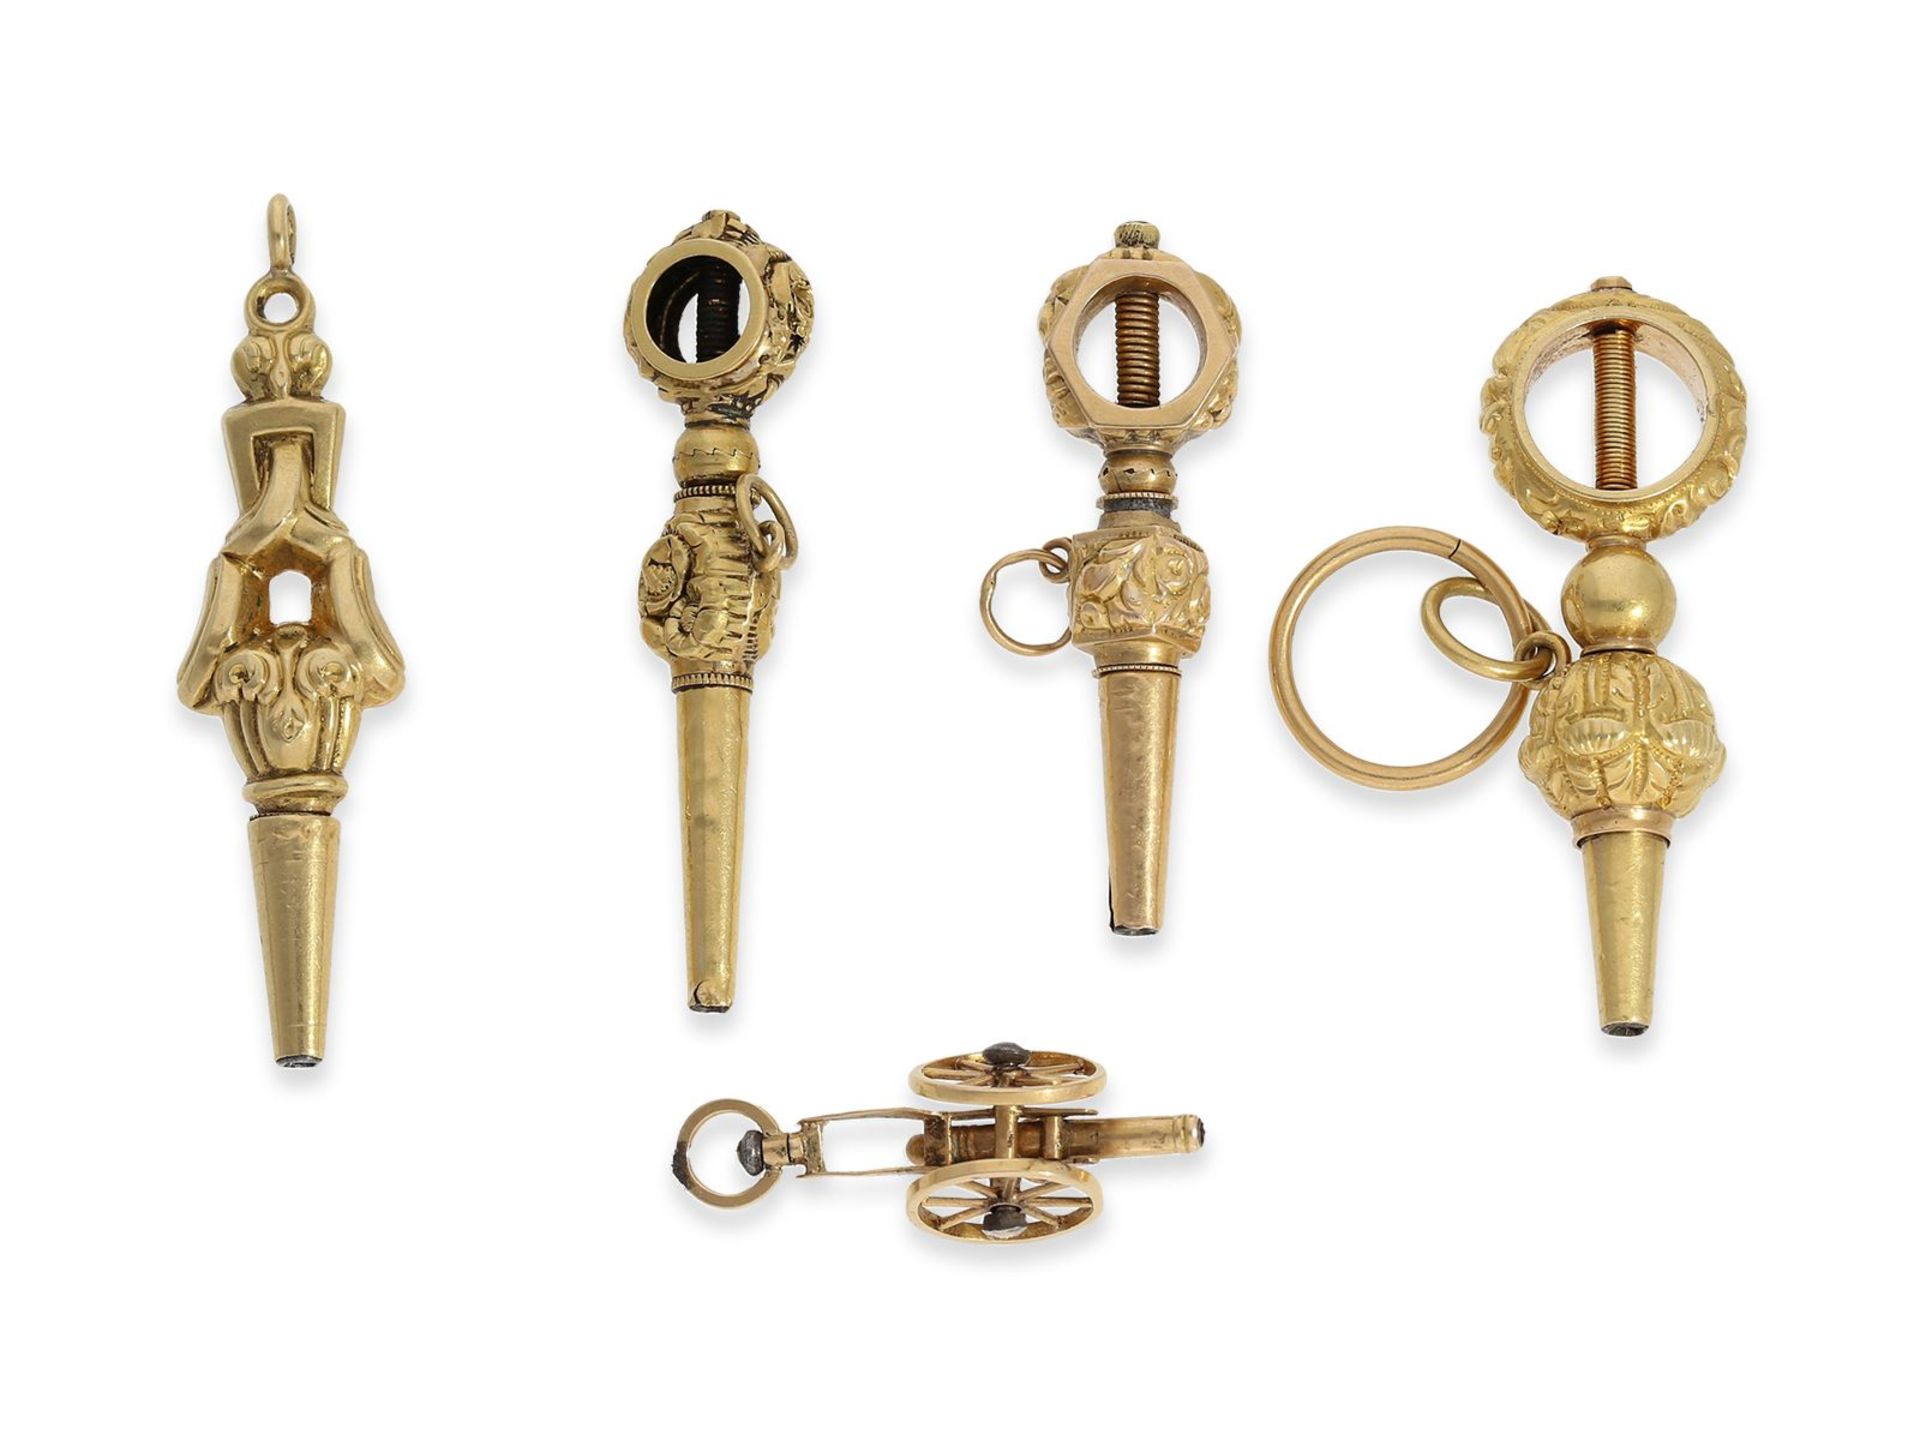 Watch keys: 5 rare gold verge watch keys, 18th century and early 19th century